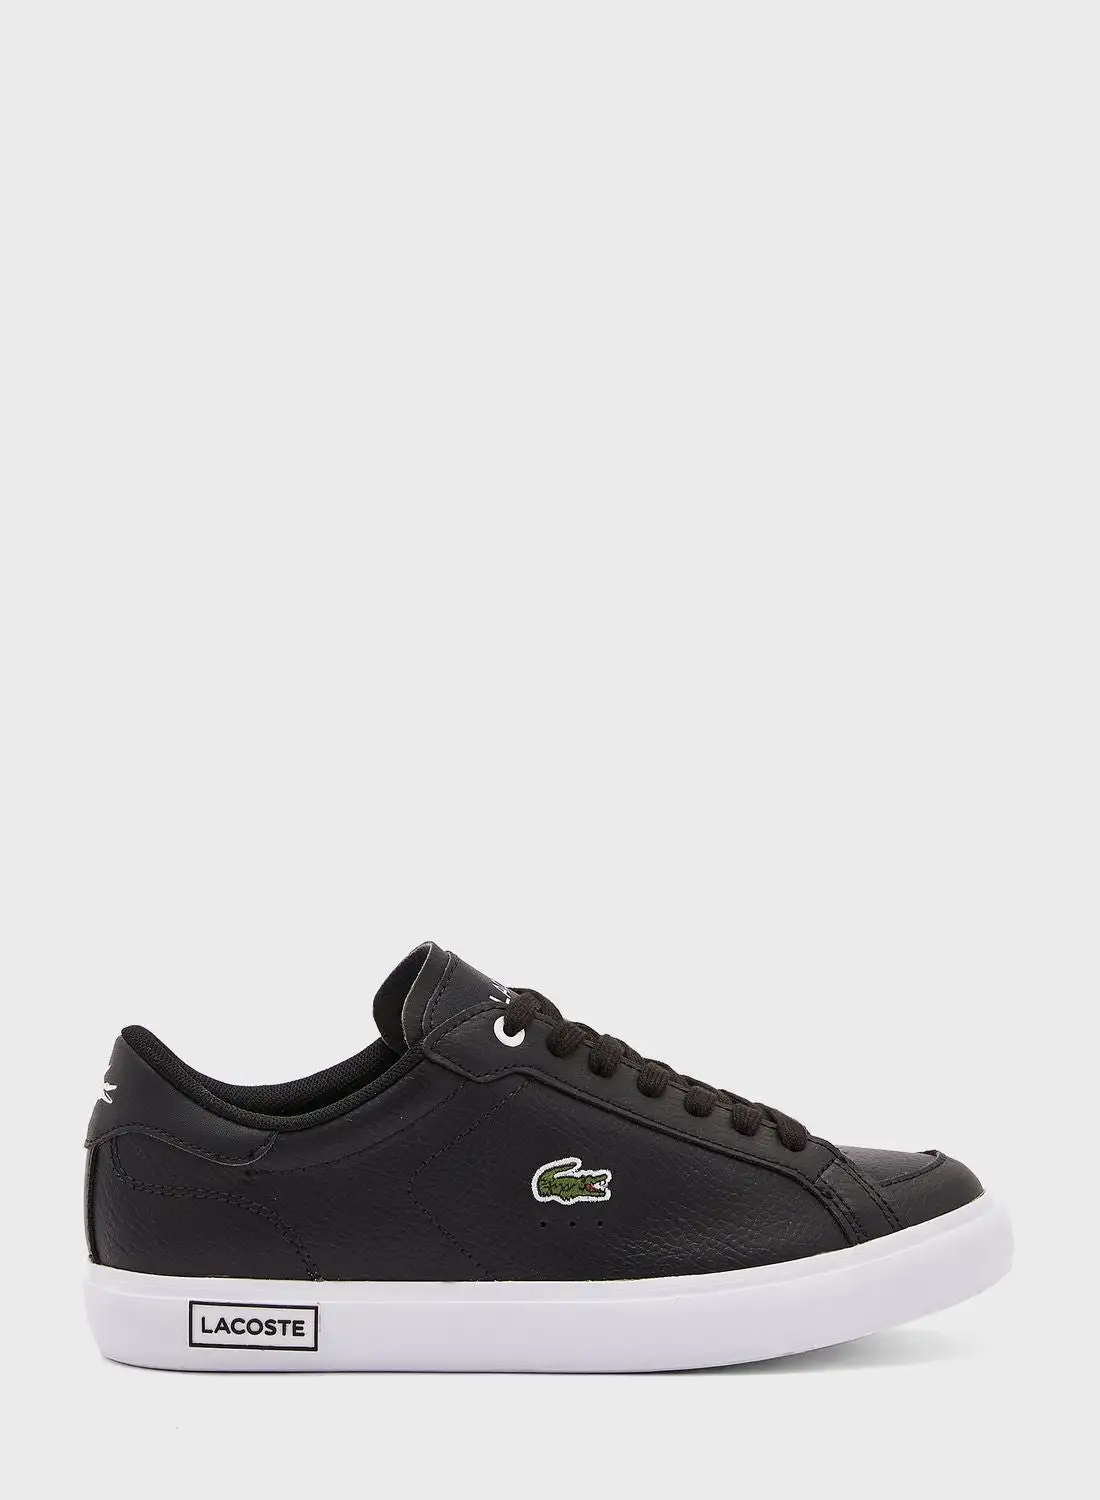 LACOSTE Powercourt 222 6 Low Top Sneakers